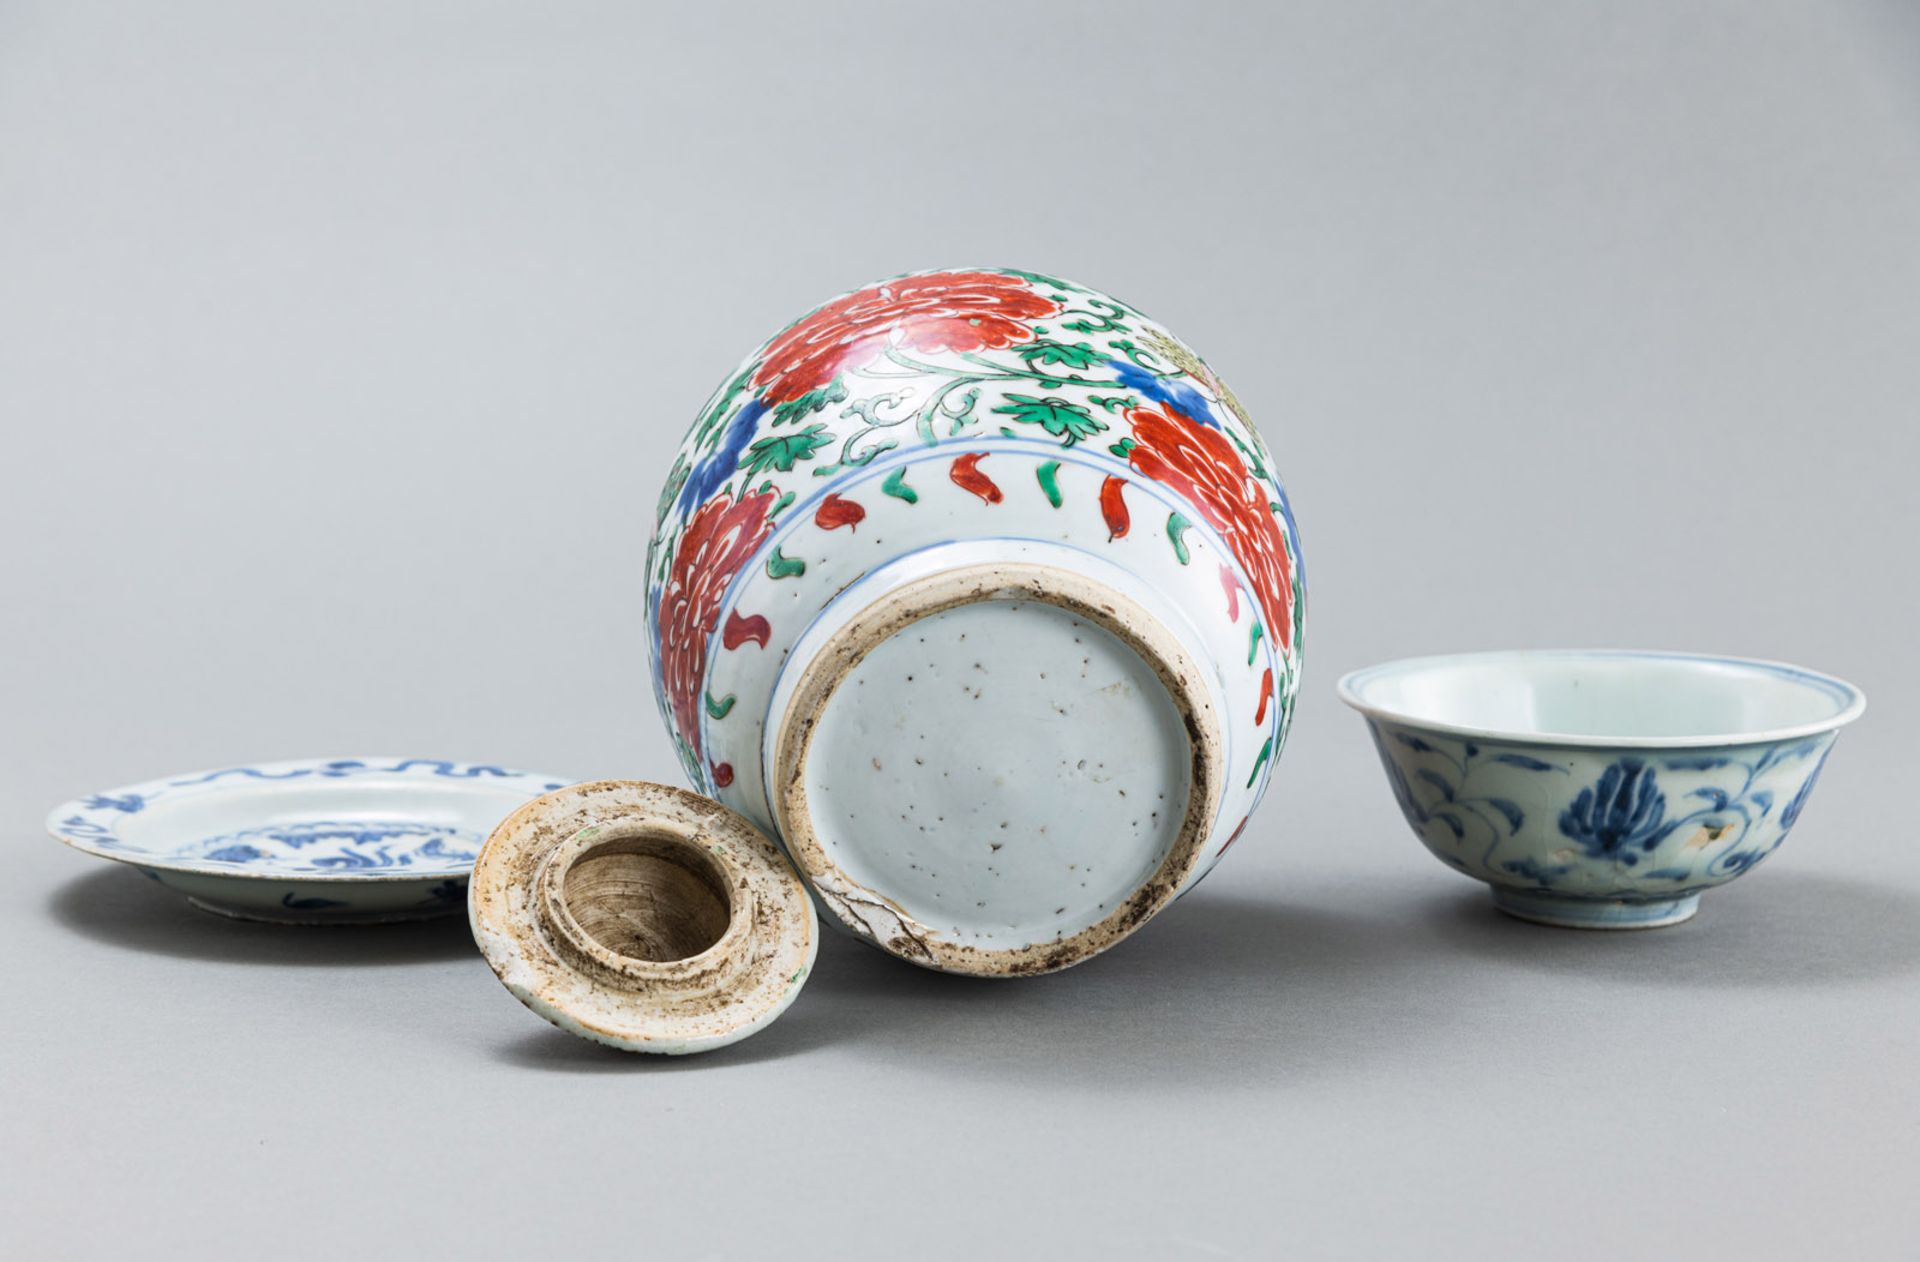 AN 'WUCAI' BUTTERFLY VASE AND COVER WITH A BLUE AND WHITE BOWL AND SAUCER - Image 4 of 4